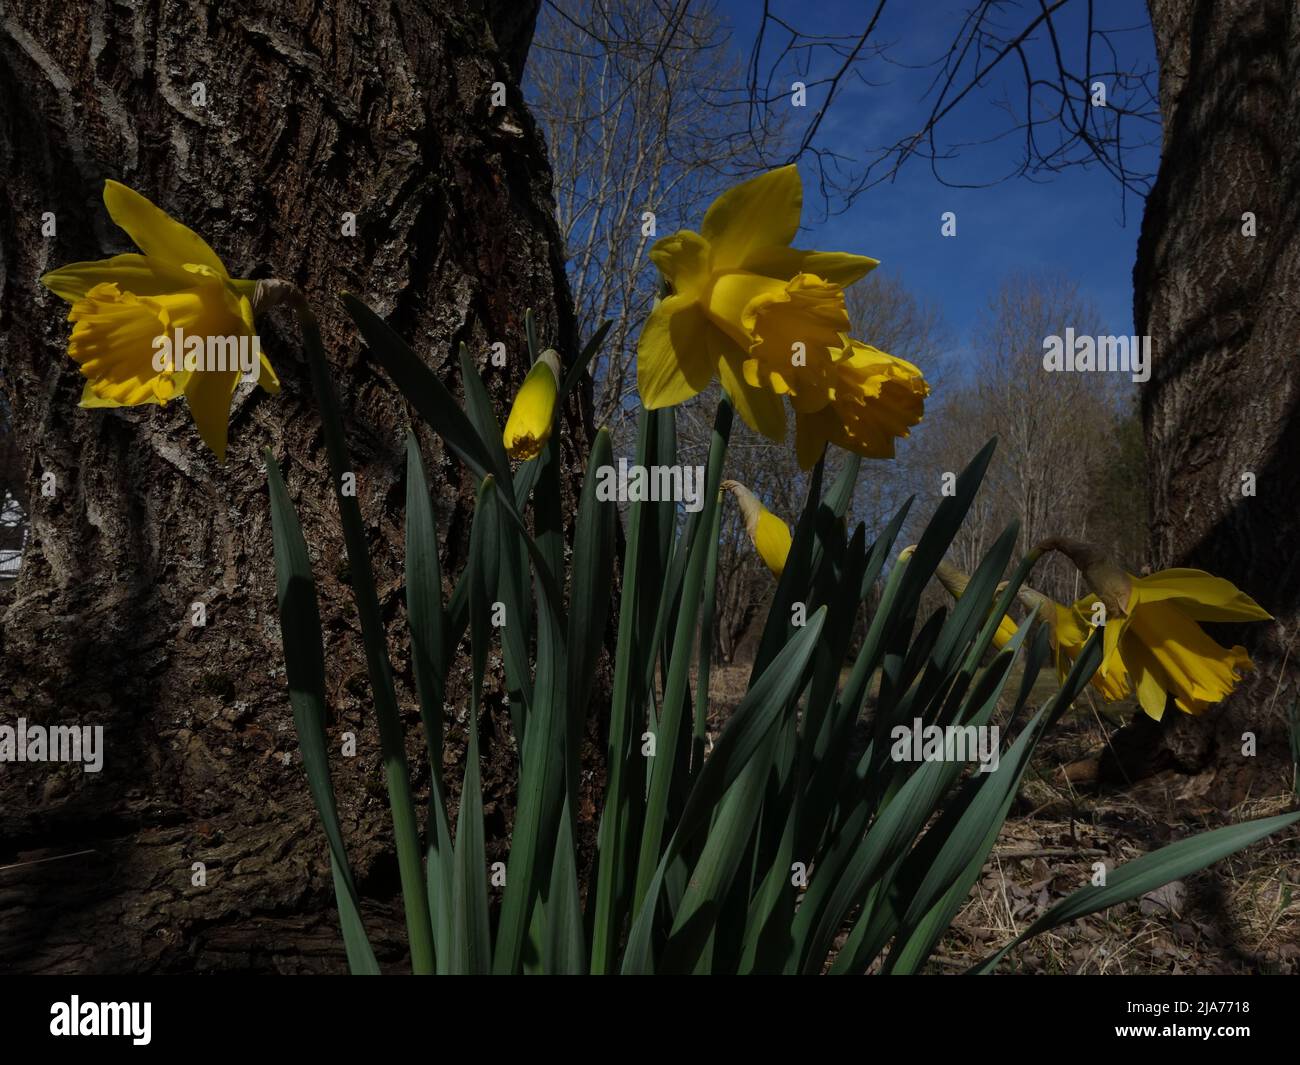 A beautiful group of daffodils stand close together, by a tree trunk. Stock Photo